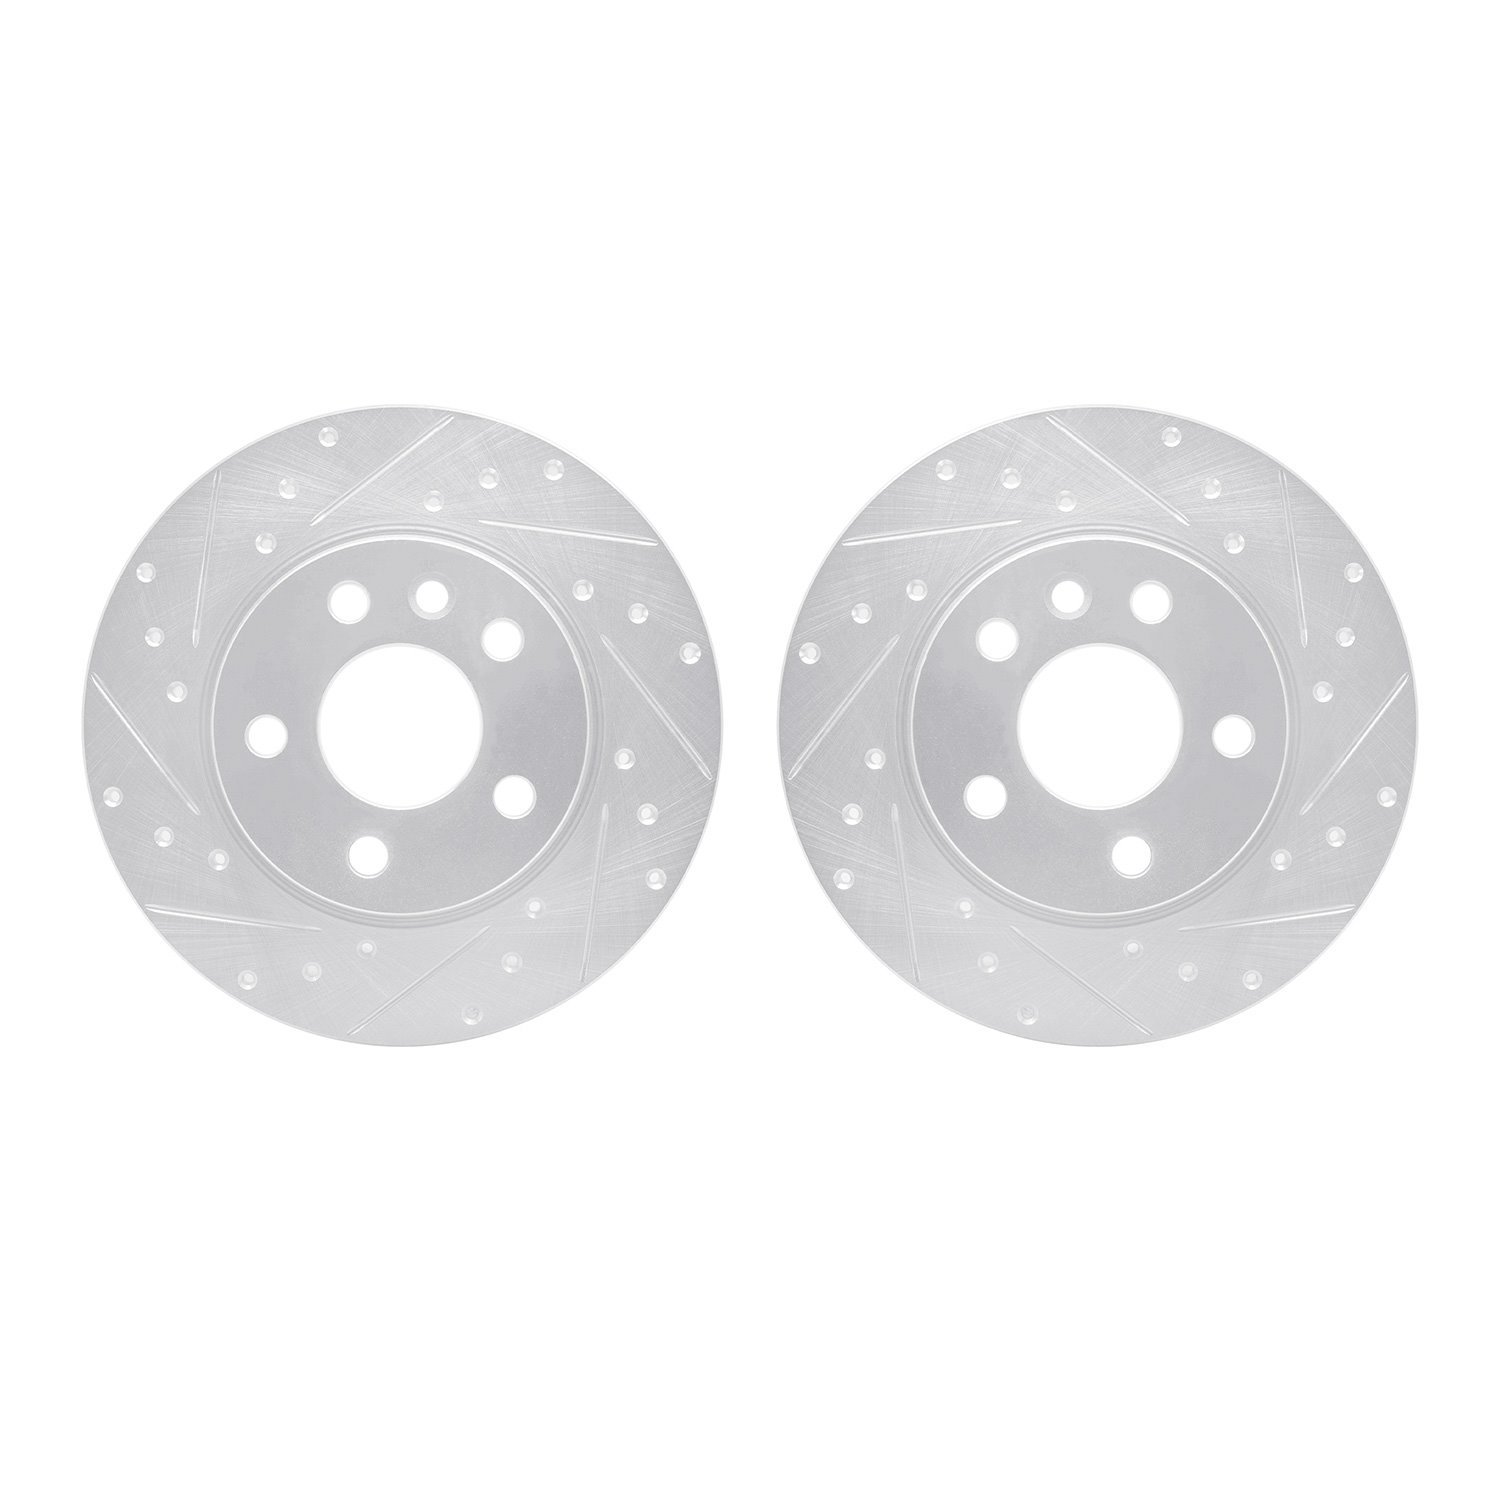 7002-74050 Drilled/Slotted Brake Rotors [Silver], 1996-2000 Audi/Volkswagen, Position: Rear